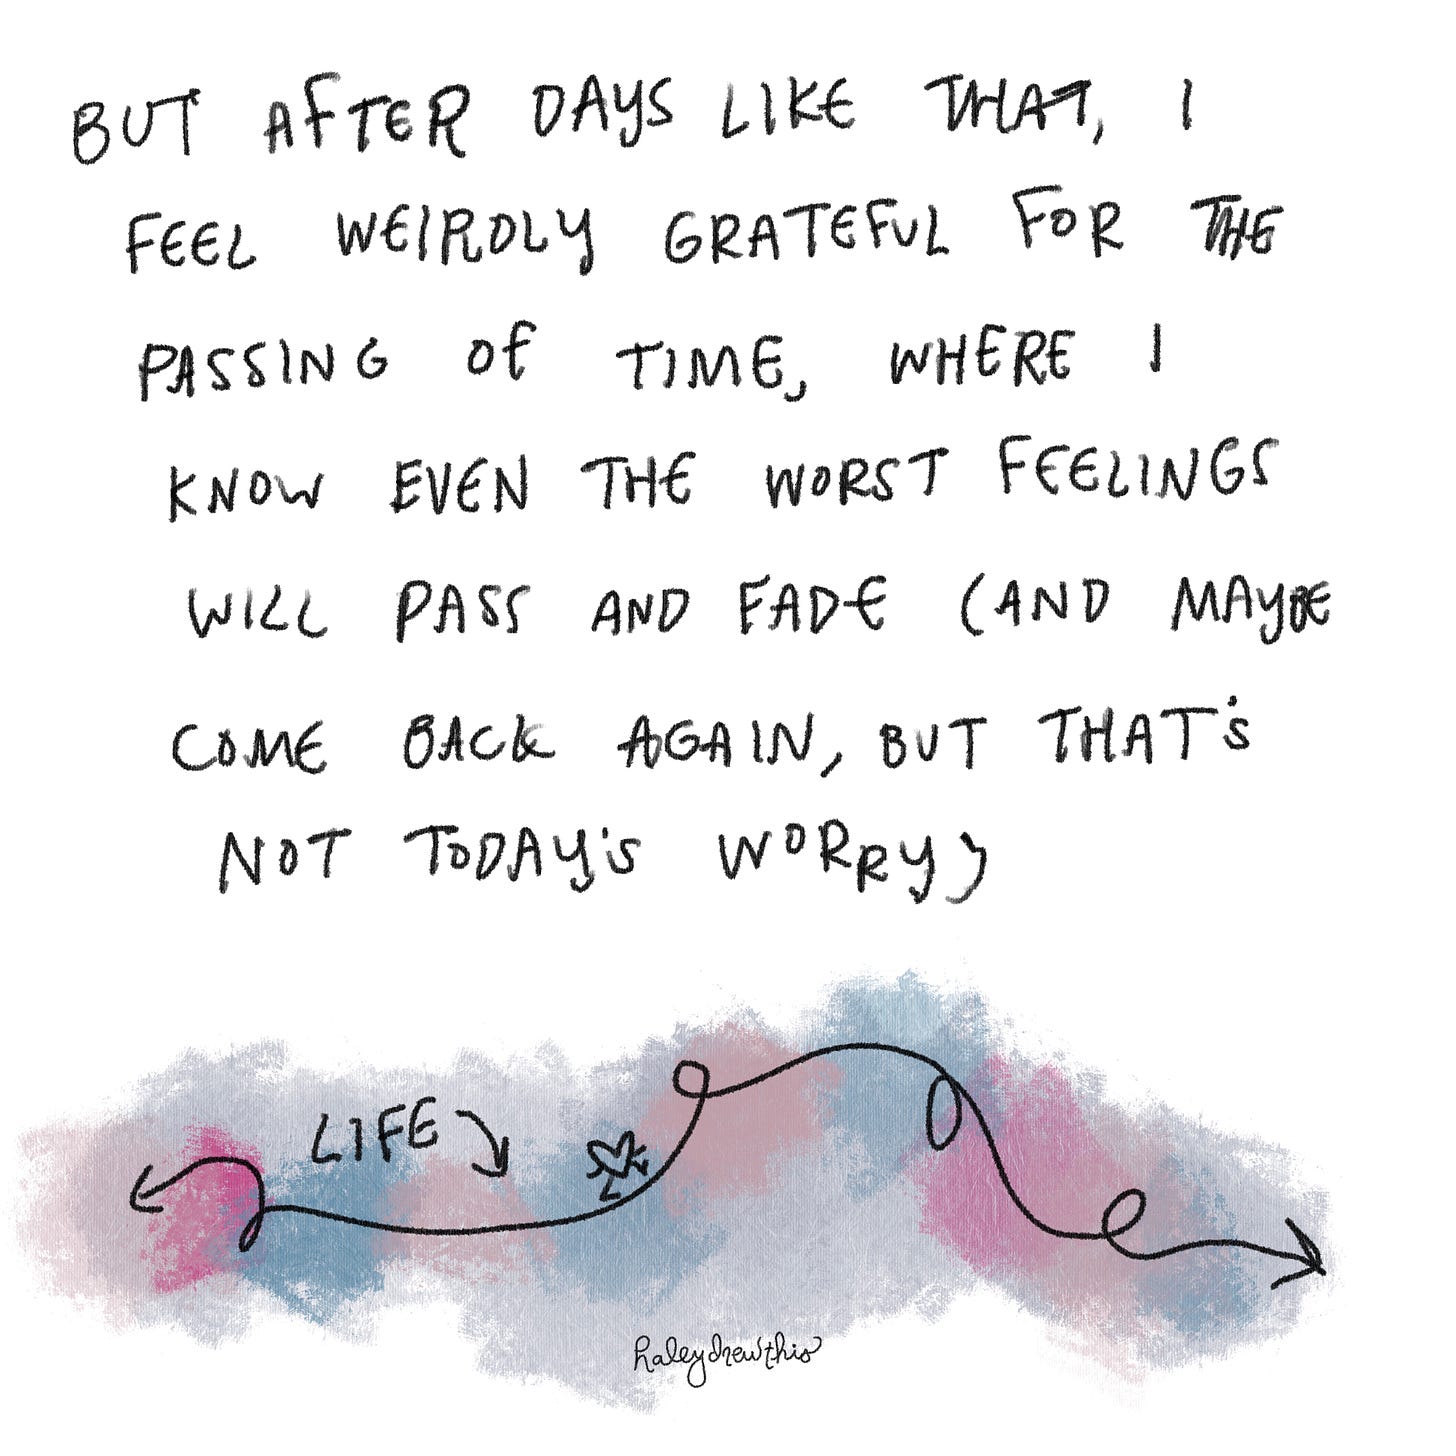 but after days like that, I feel weirdly grateful for the passing of time, where I know even the worst feelings will pass and fade